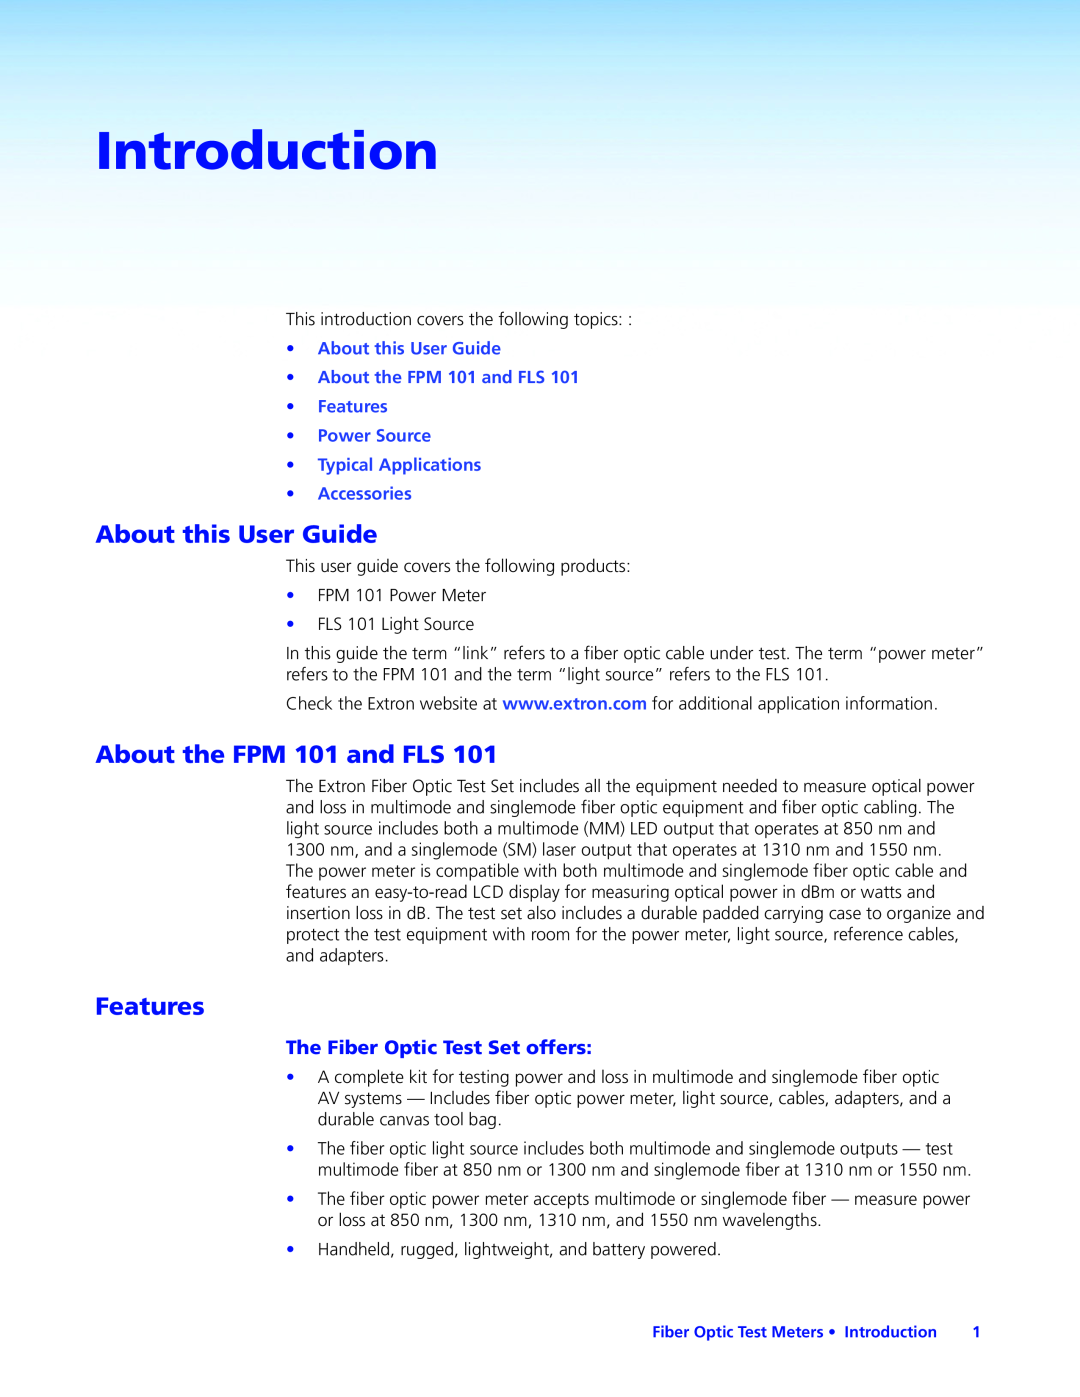 Extron electronic FLS 101 manual Introduction, About this User Guide, About the FPM 101 and FLS, Features 